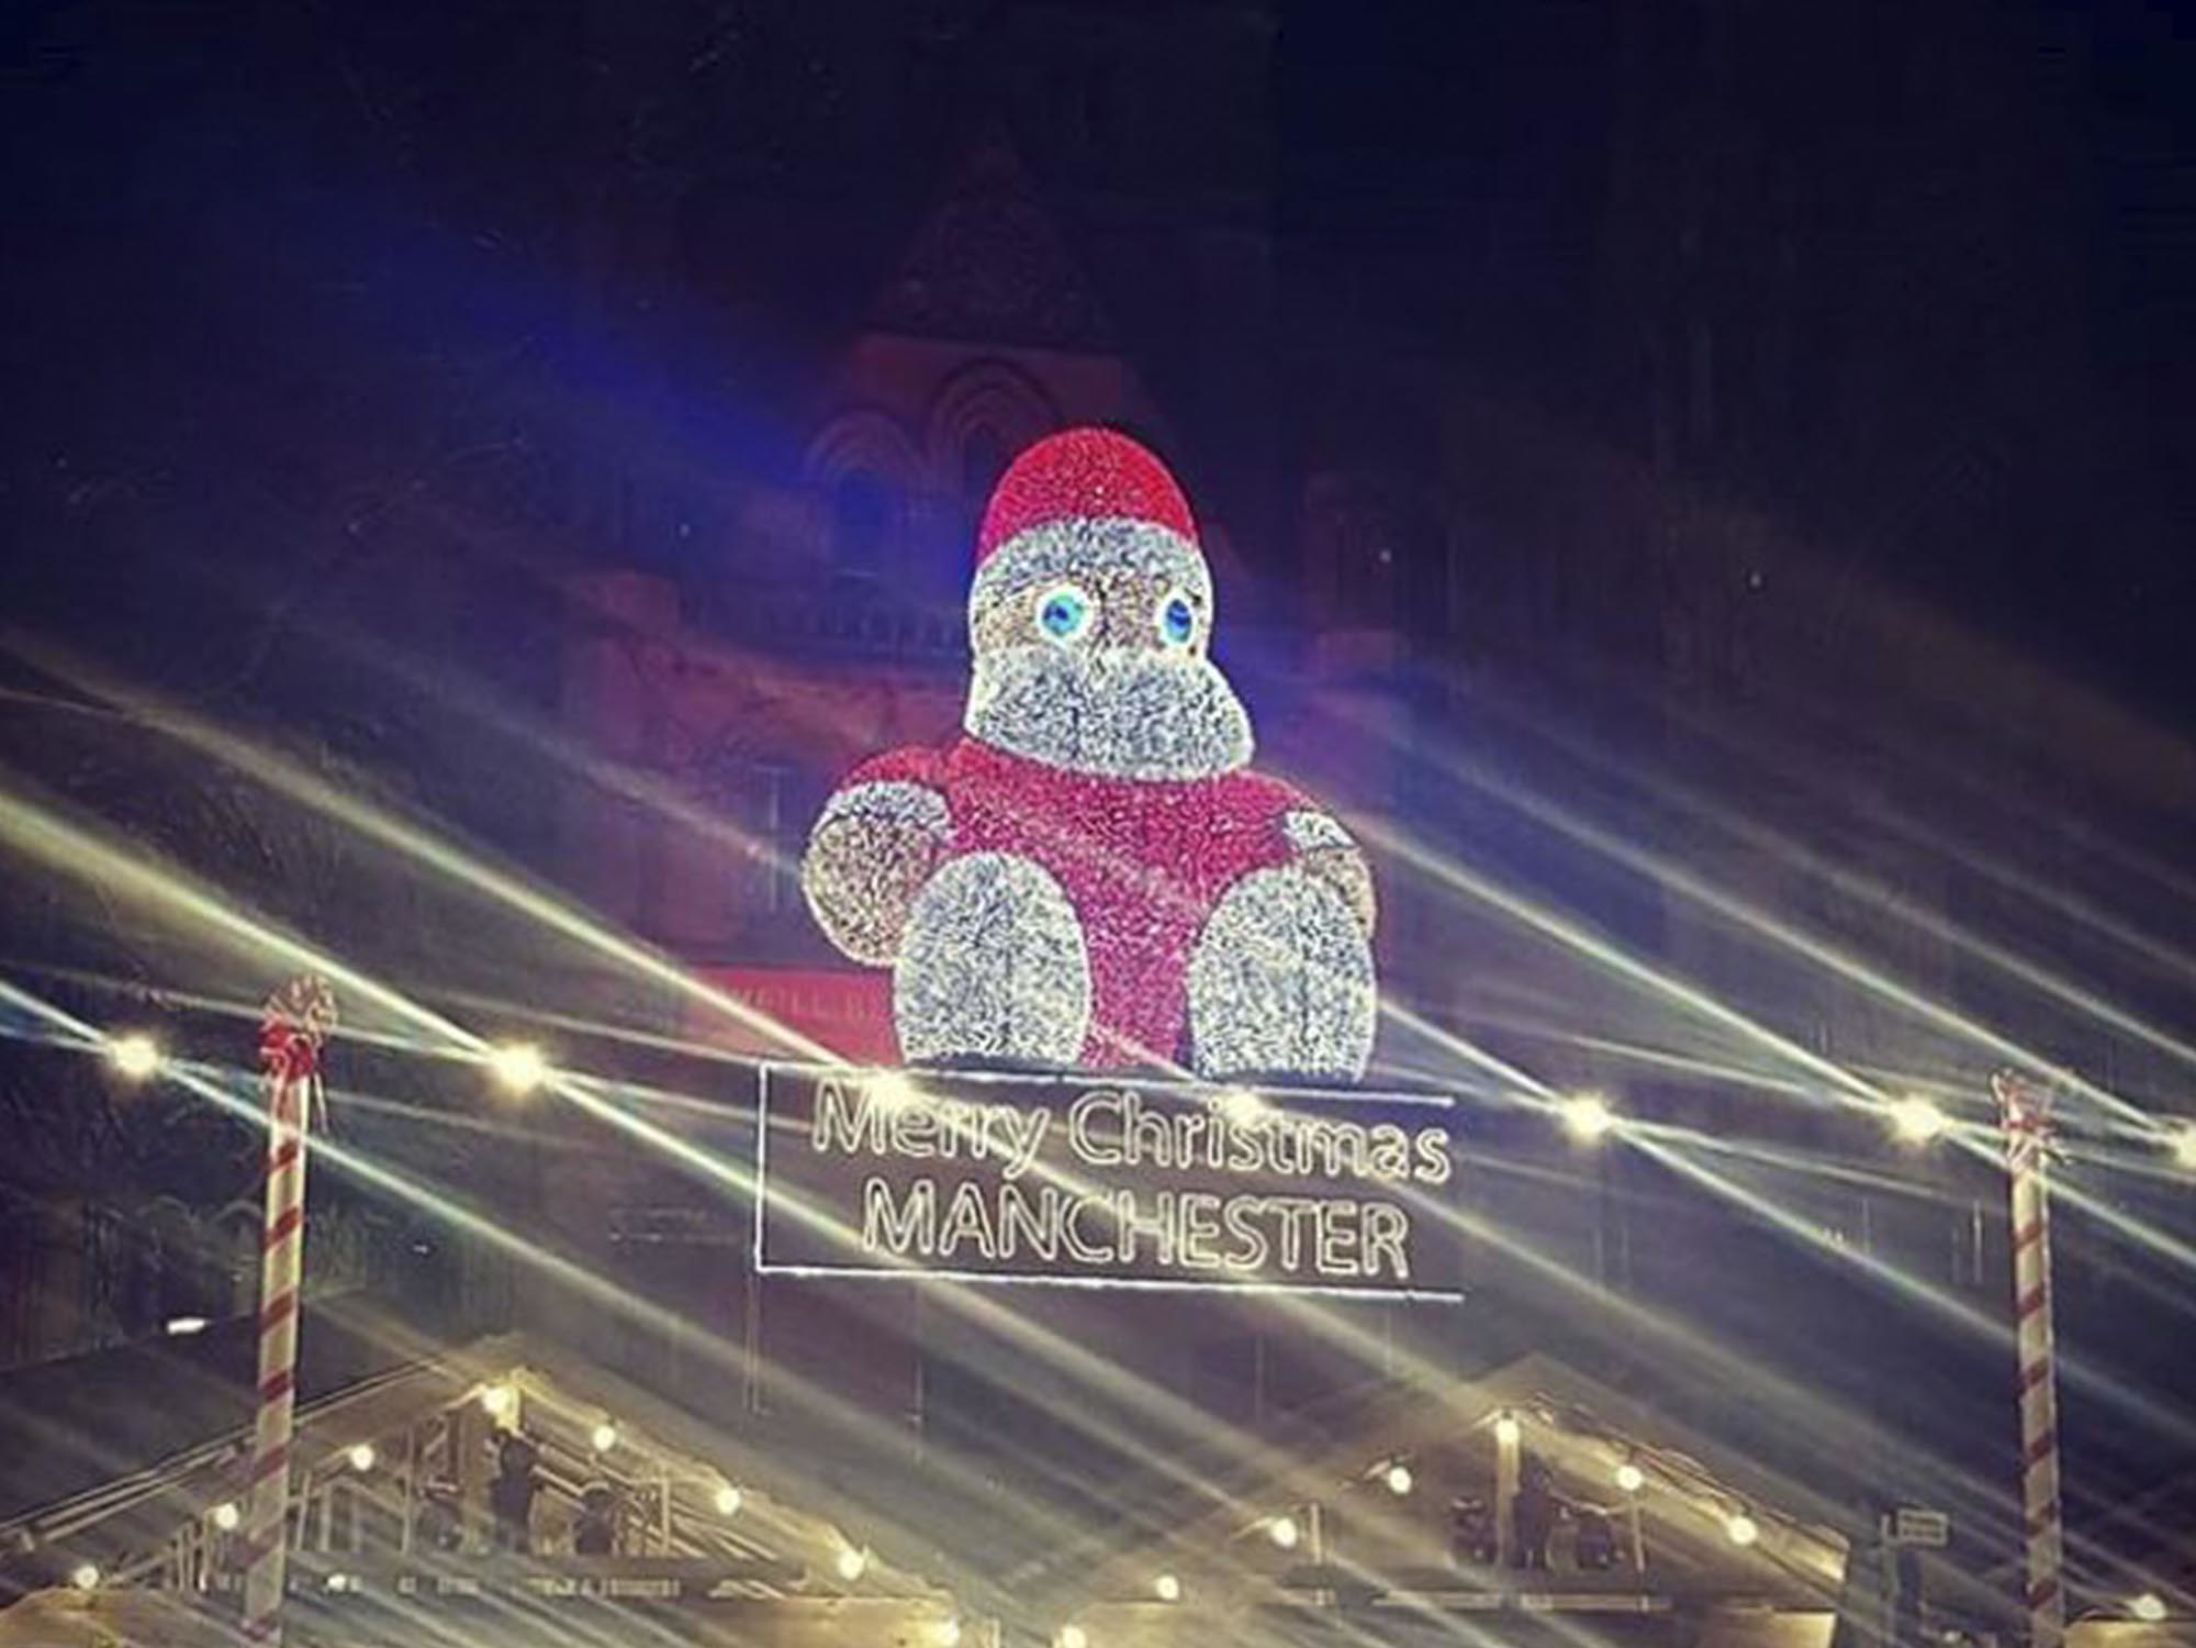 Manchester Events to Know About - Manchester Christmas Markets